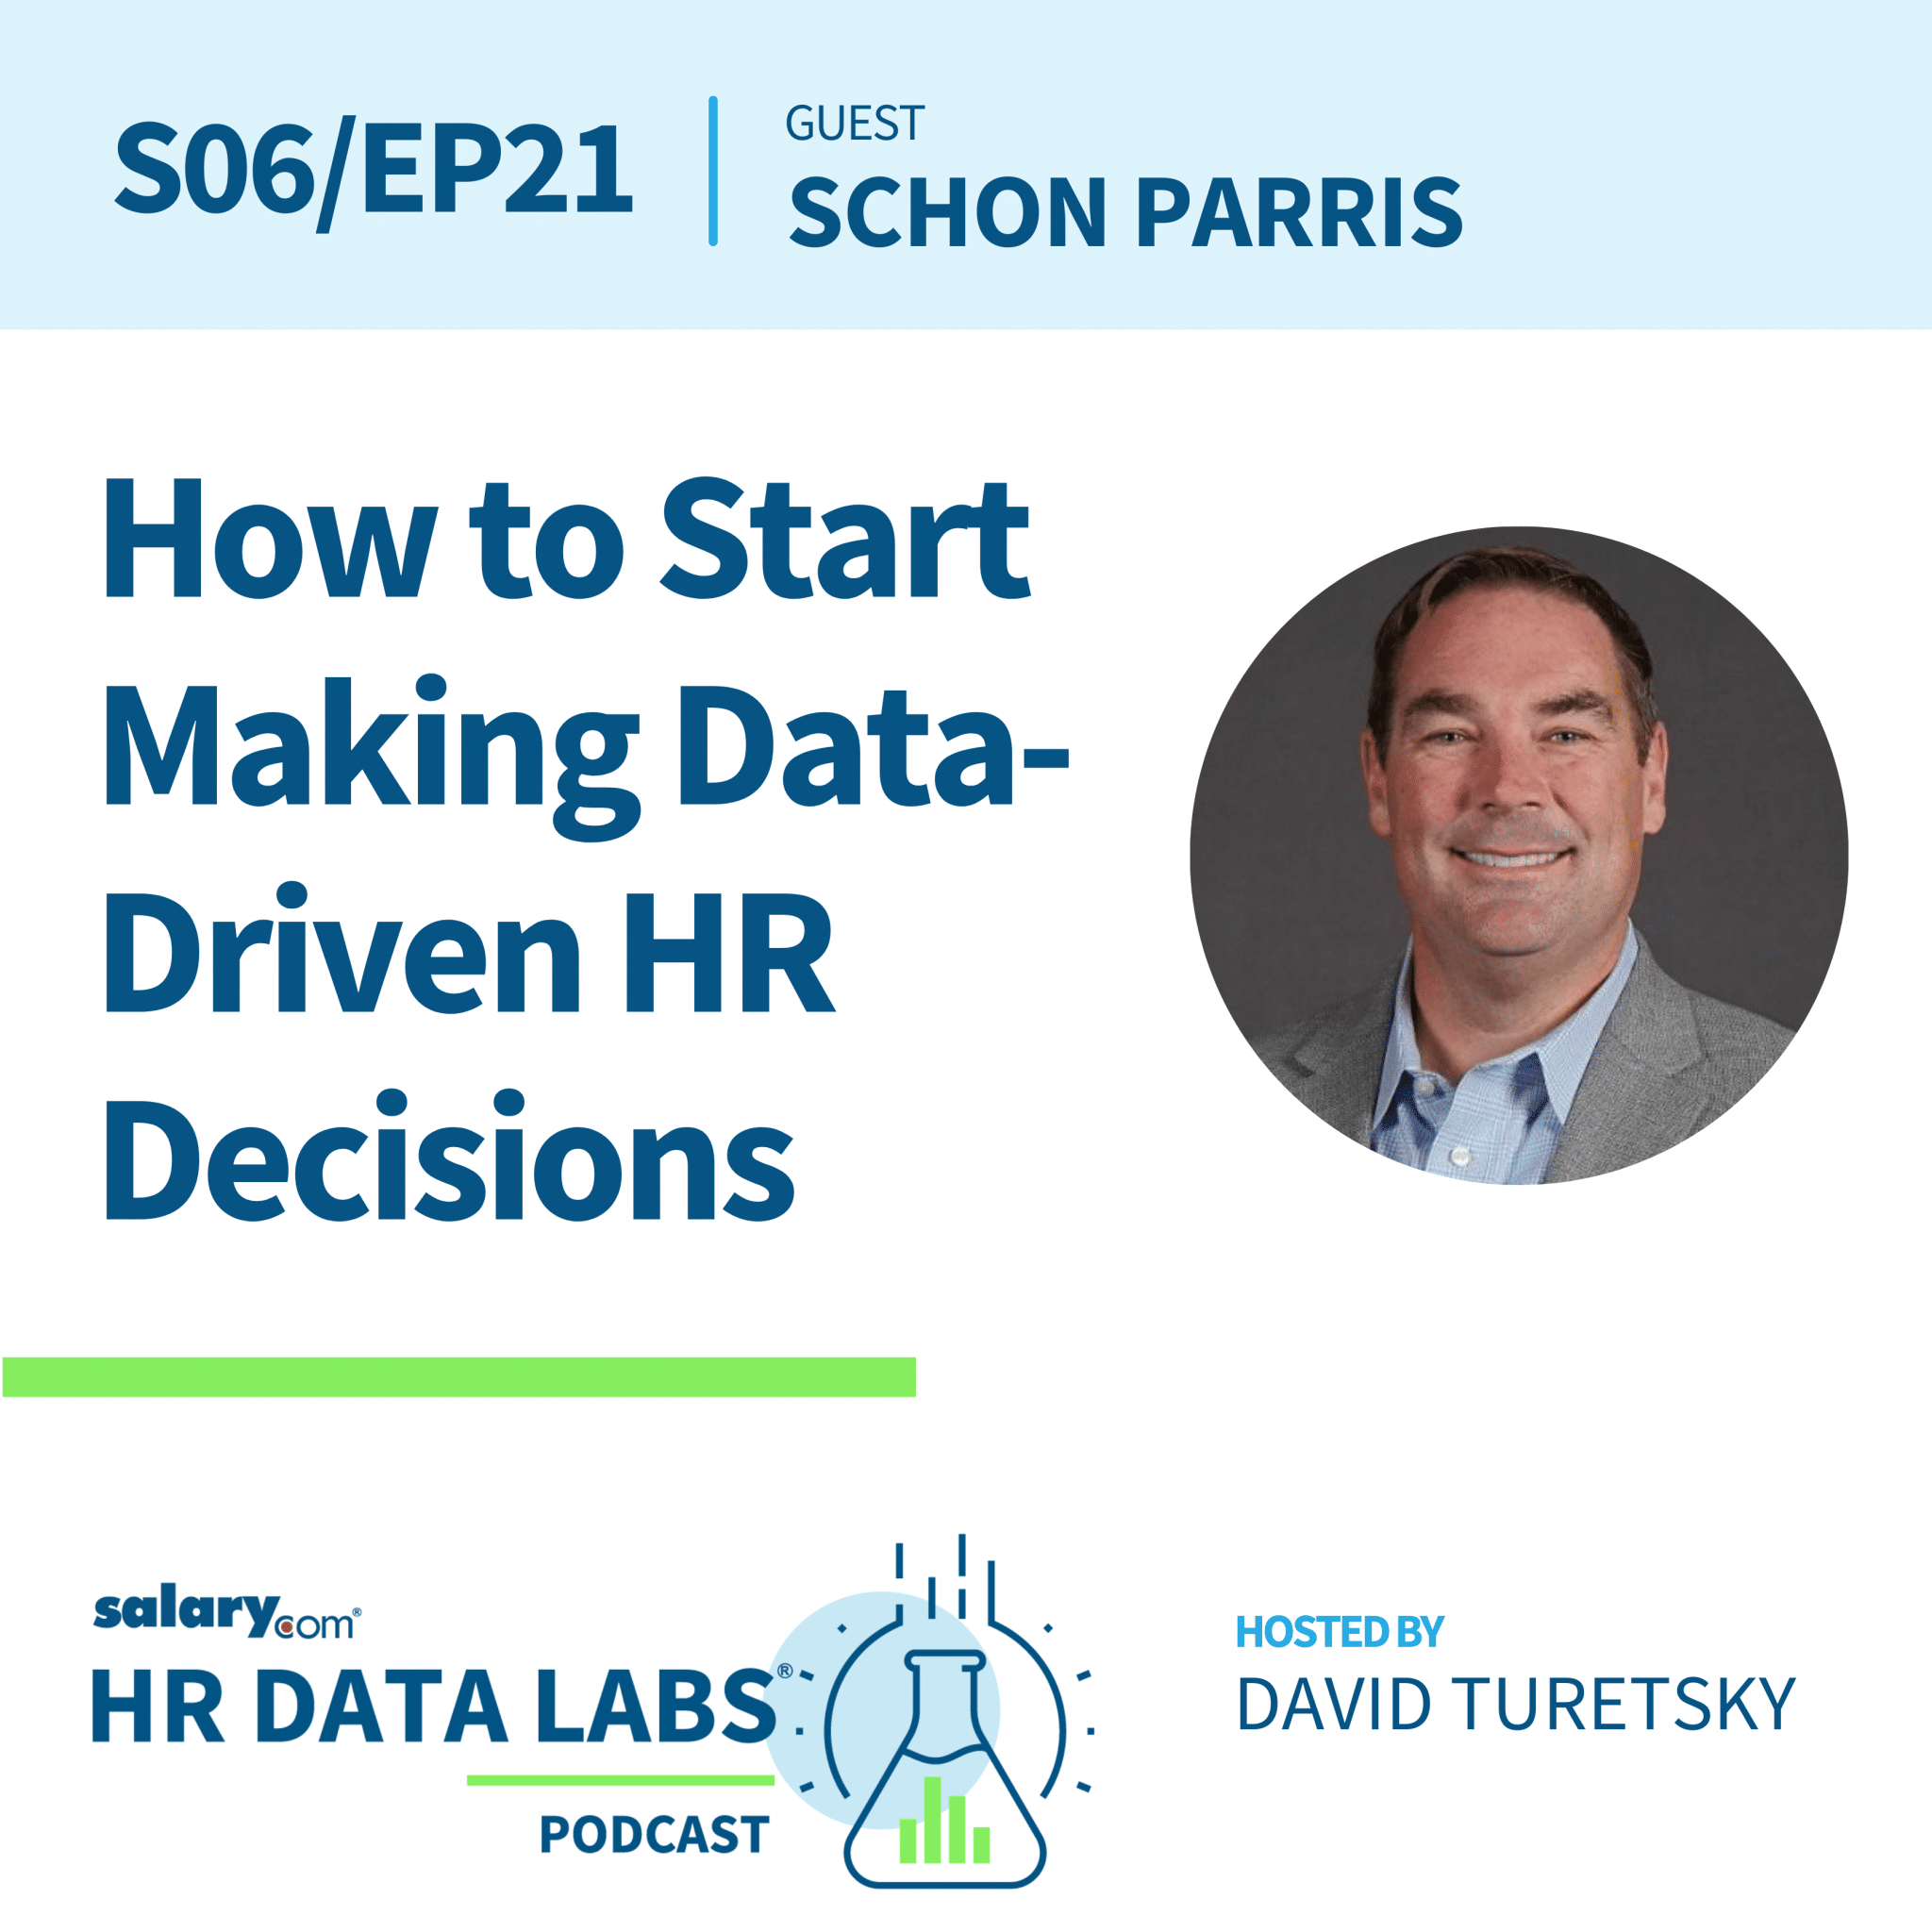 Schon Parris – How to Start Making Data-Driven HR Decisions